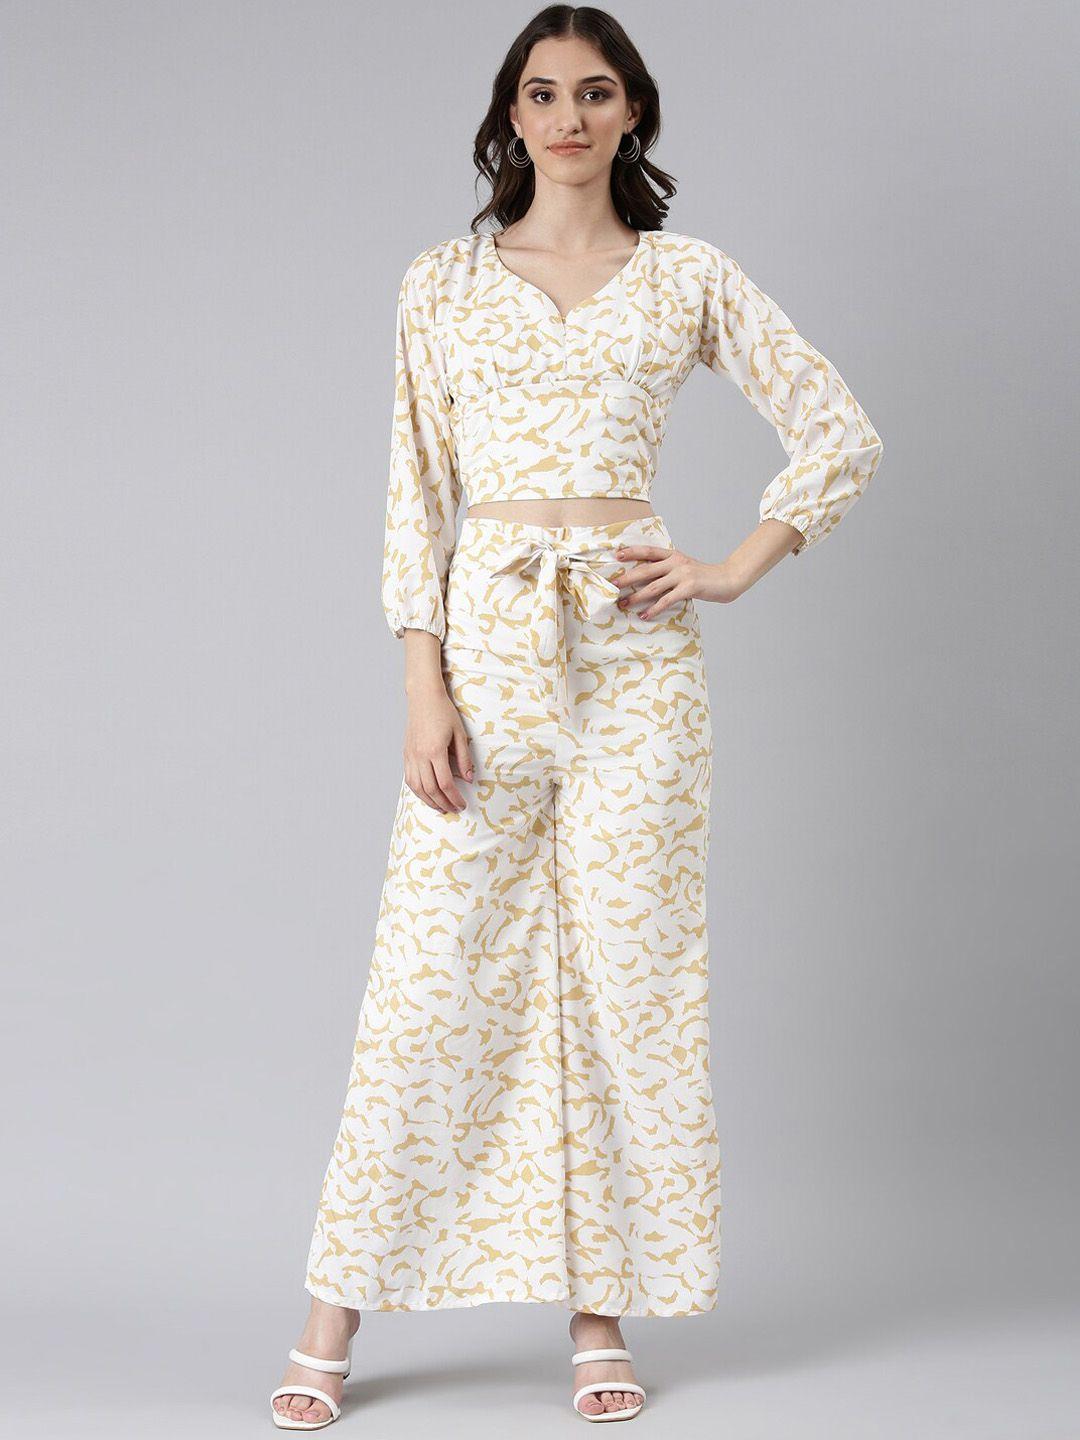 showoff printed top with trousers co-ords